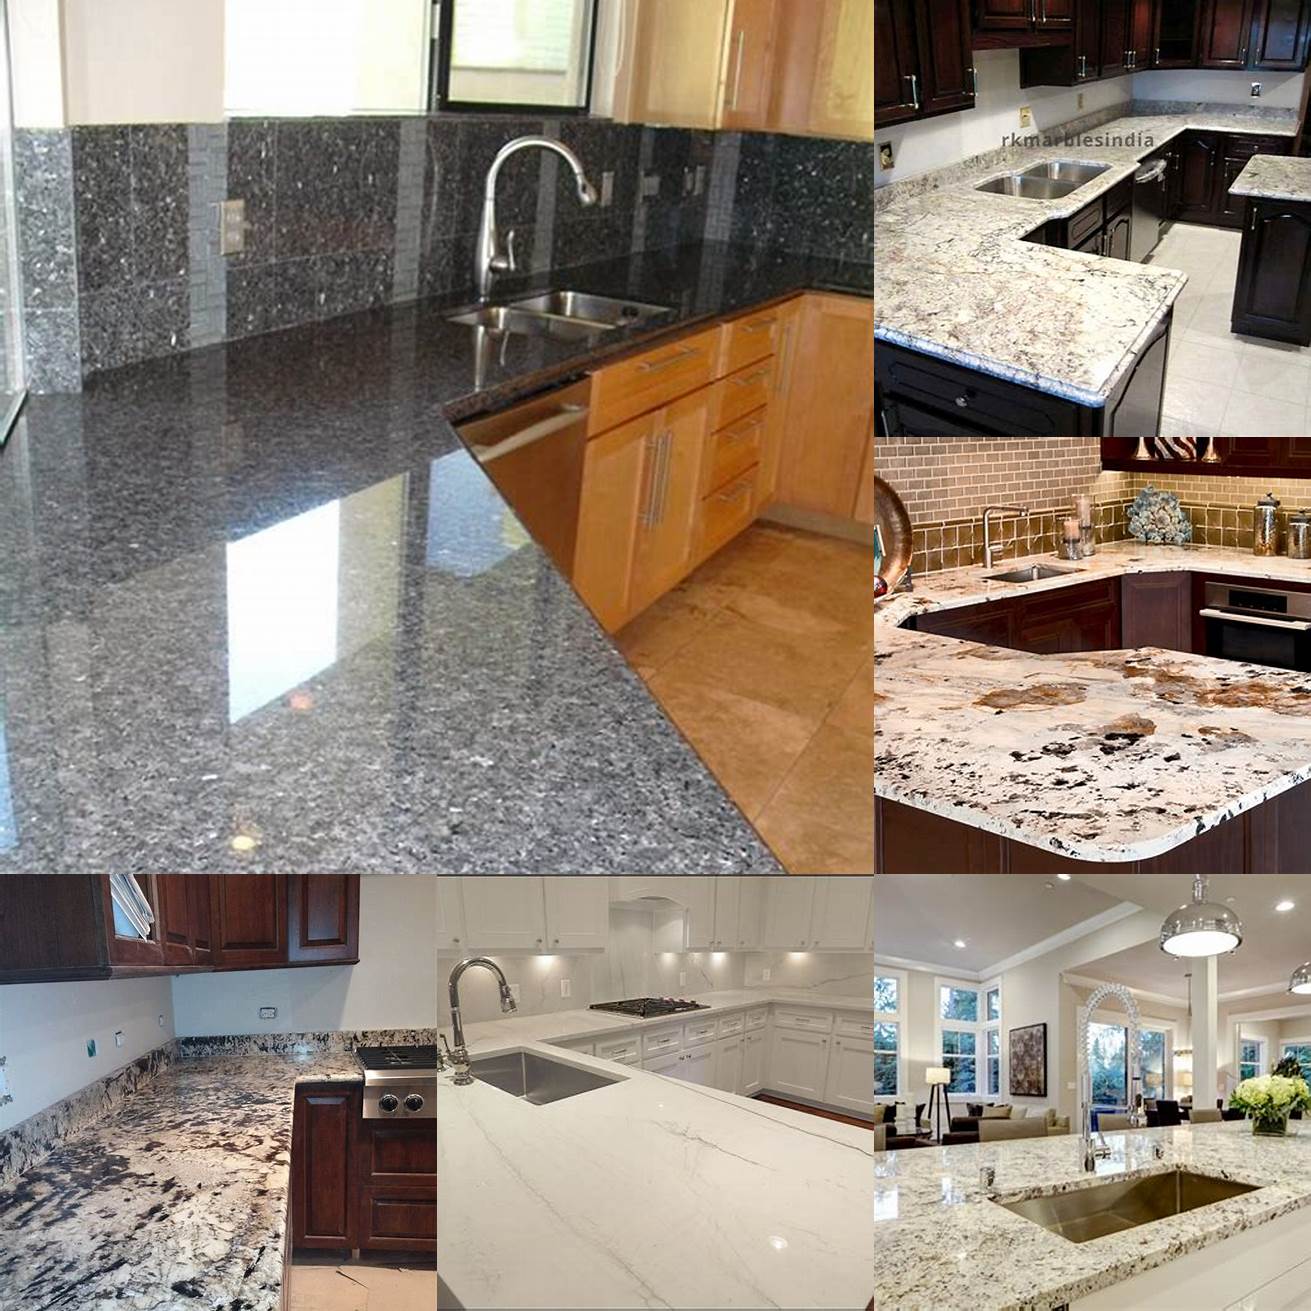 Granite Another durable material granite is resistant to scratches and stains It comes in a variety of colors and patterns to fit your bathroom design However it can be expensive and requires regular sealing